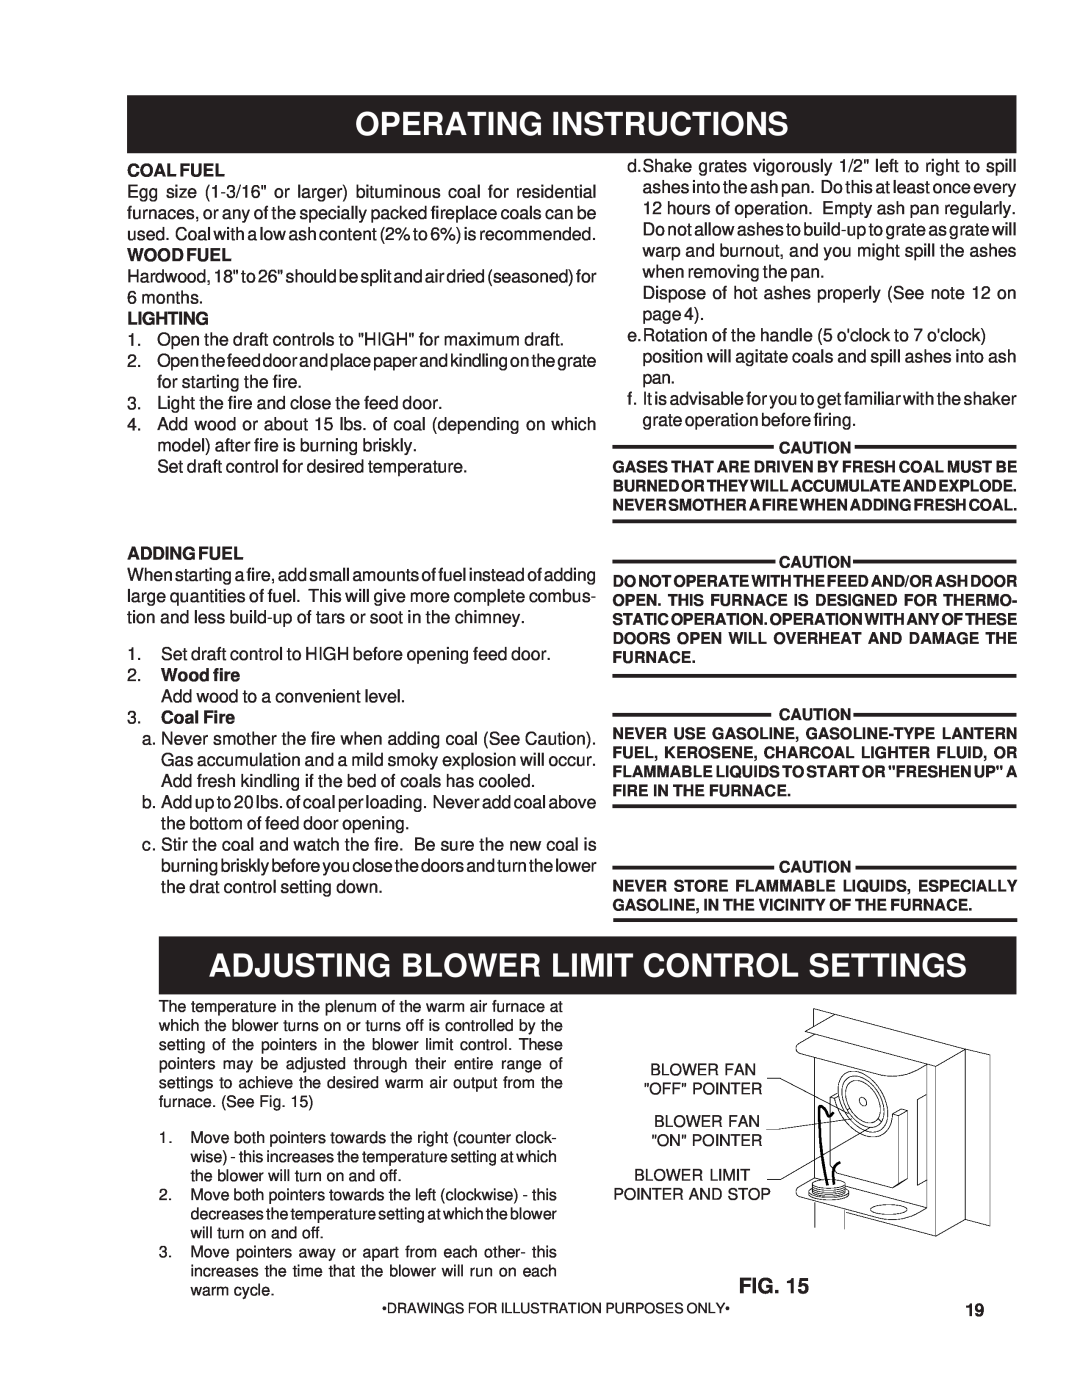 United States Stove 22AF Operating Instructions, Adjusting Blower Limit Control Settings, Coal Fuel, Wood Fuel, Lighting 